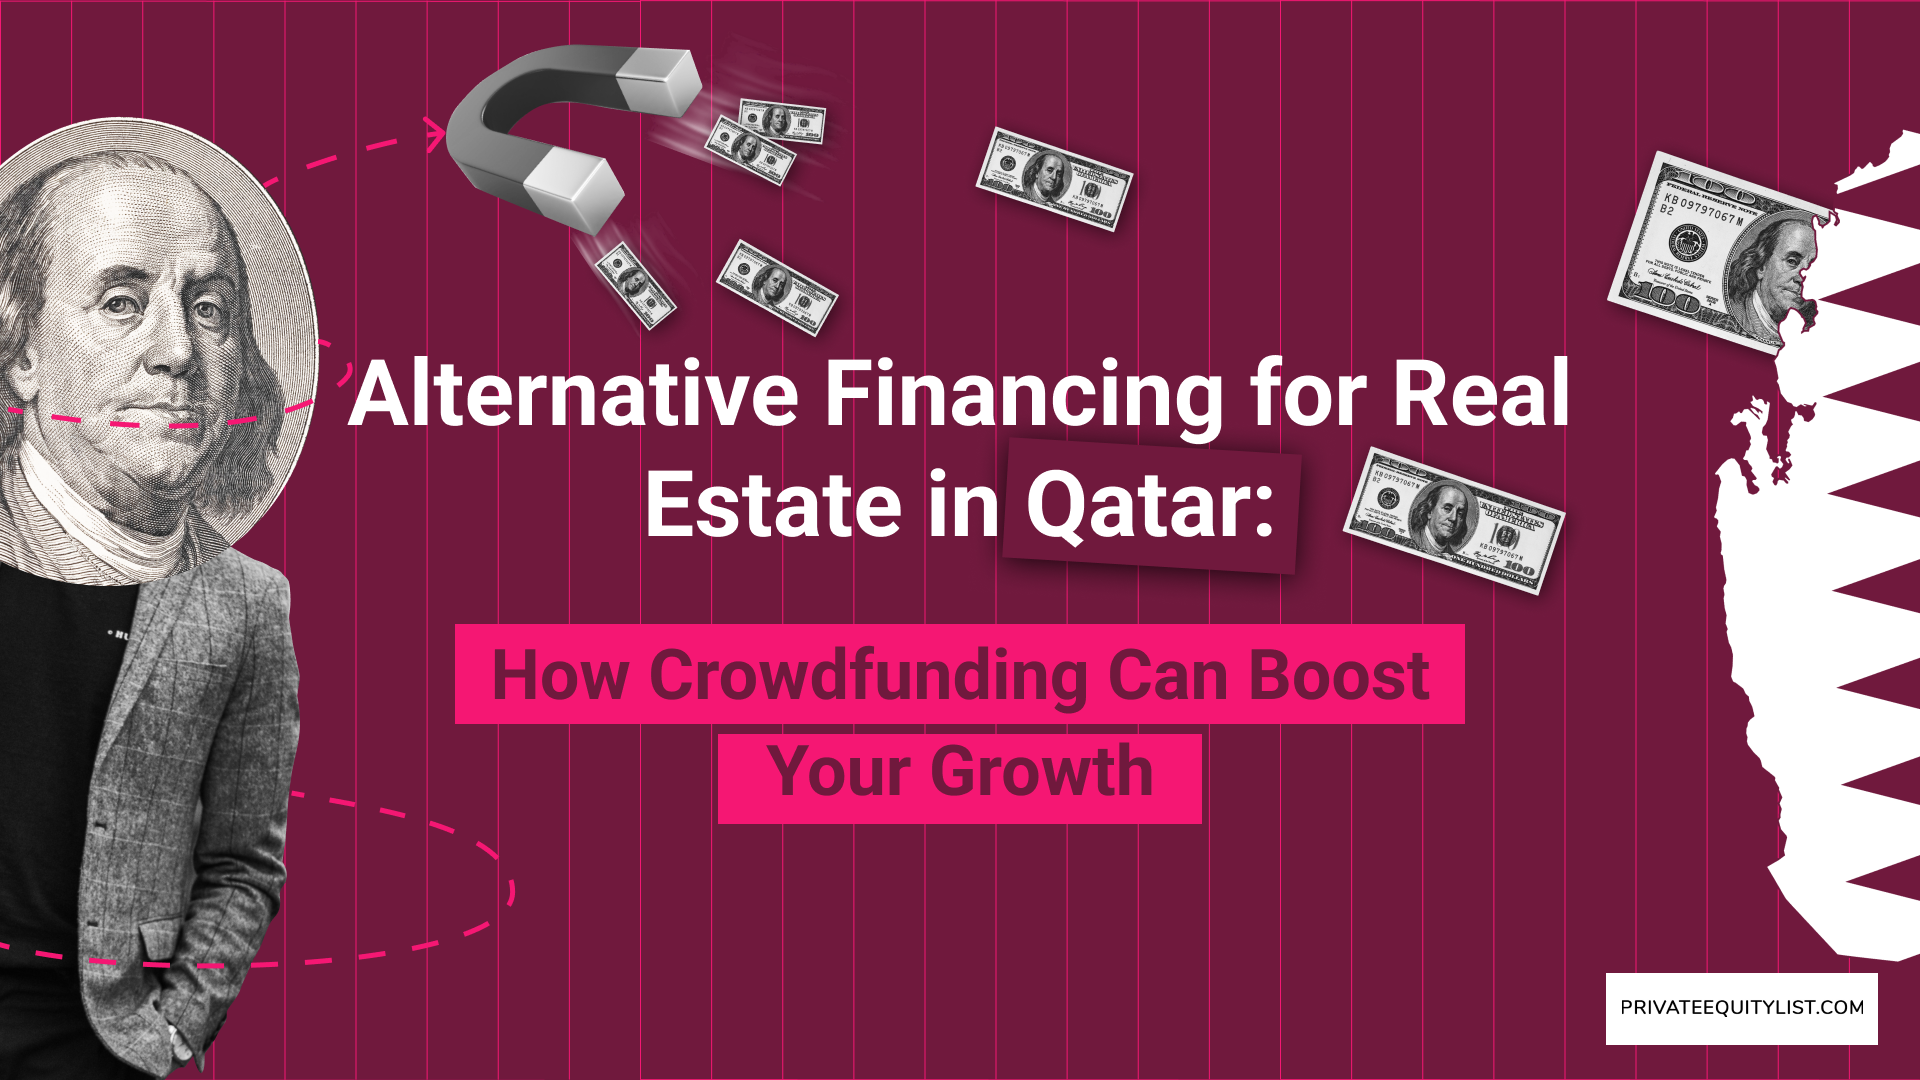 Alternative Financing for Real Estate in Qatar: How Crowdfunding Can Boost Your Growth